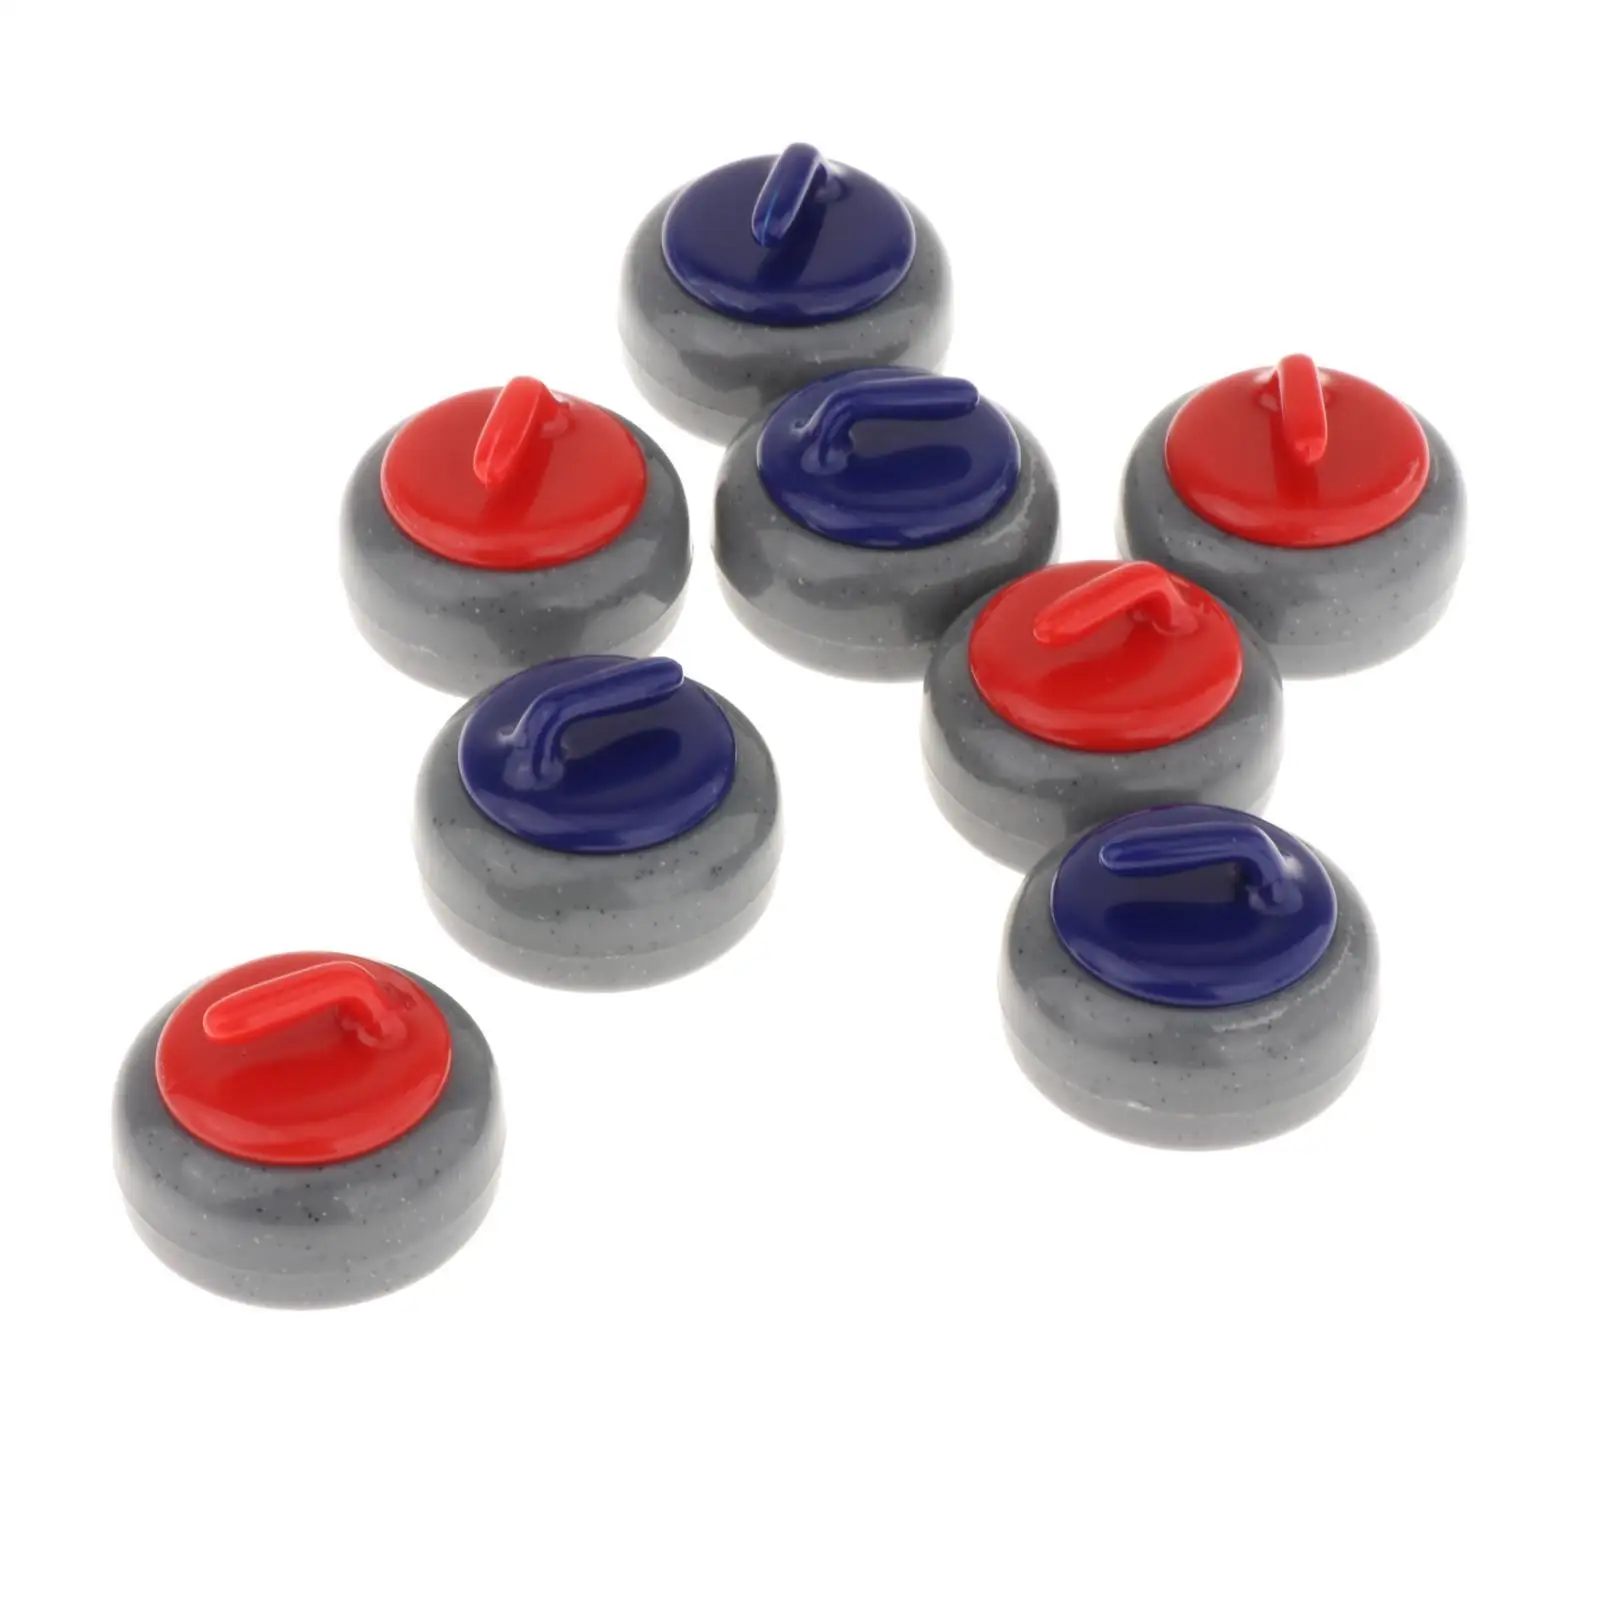  8x Tabletop Curling Game Pucks Floating Curling Ball Kids Adults Travel Portable Sports Toy Replacement Shuffleboard Rollers 